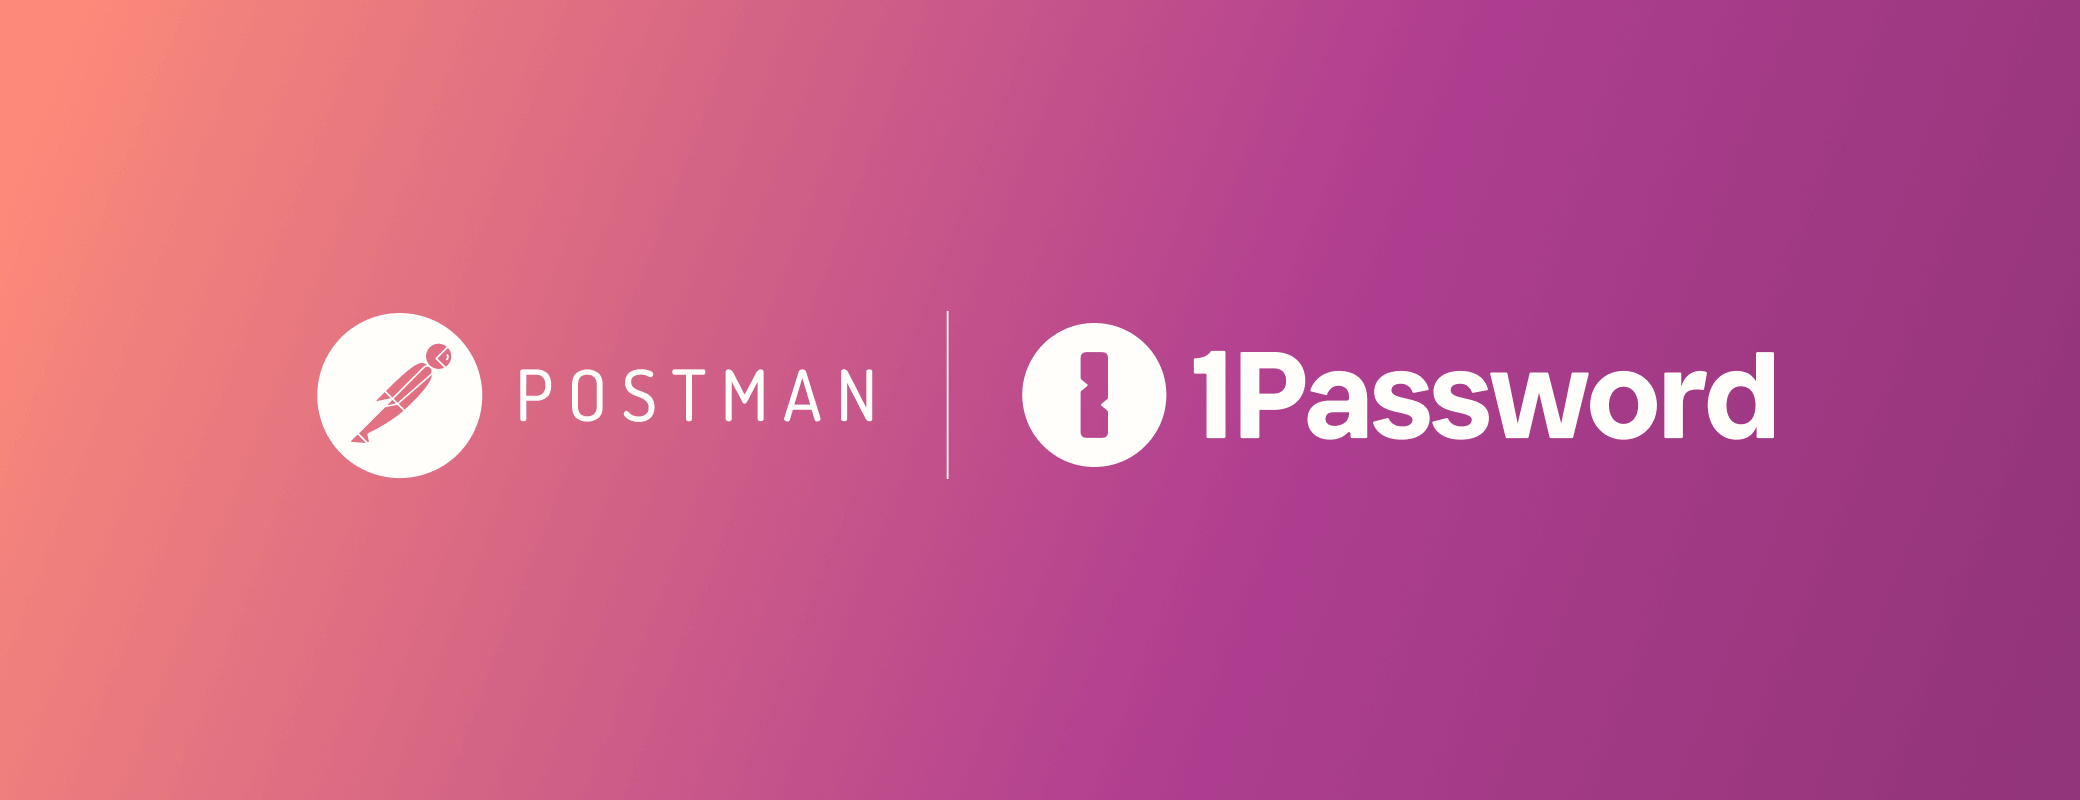 Improve API security and collaboration with 1Password and Postman